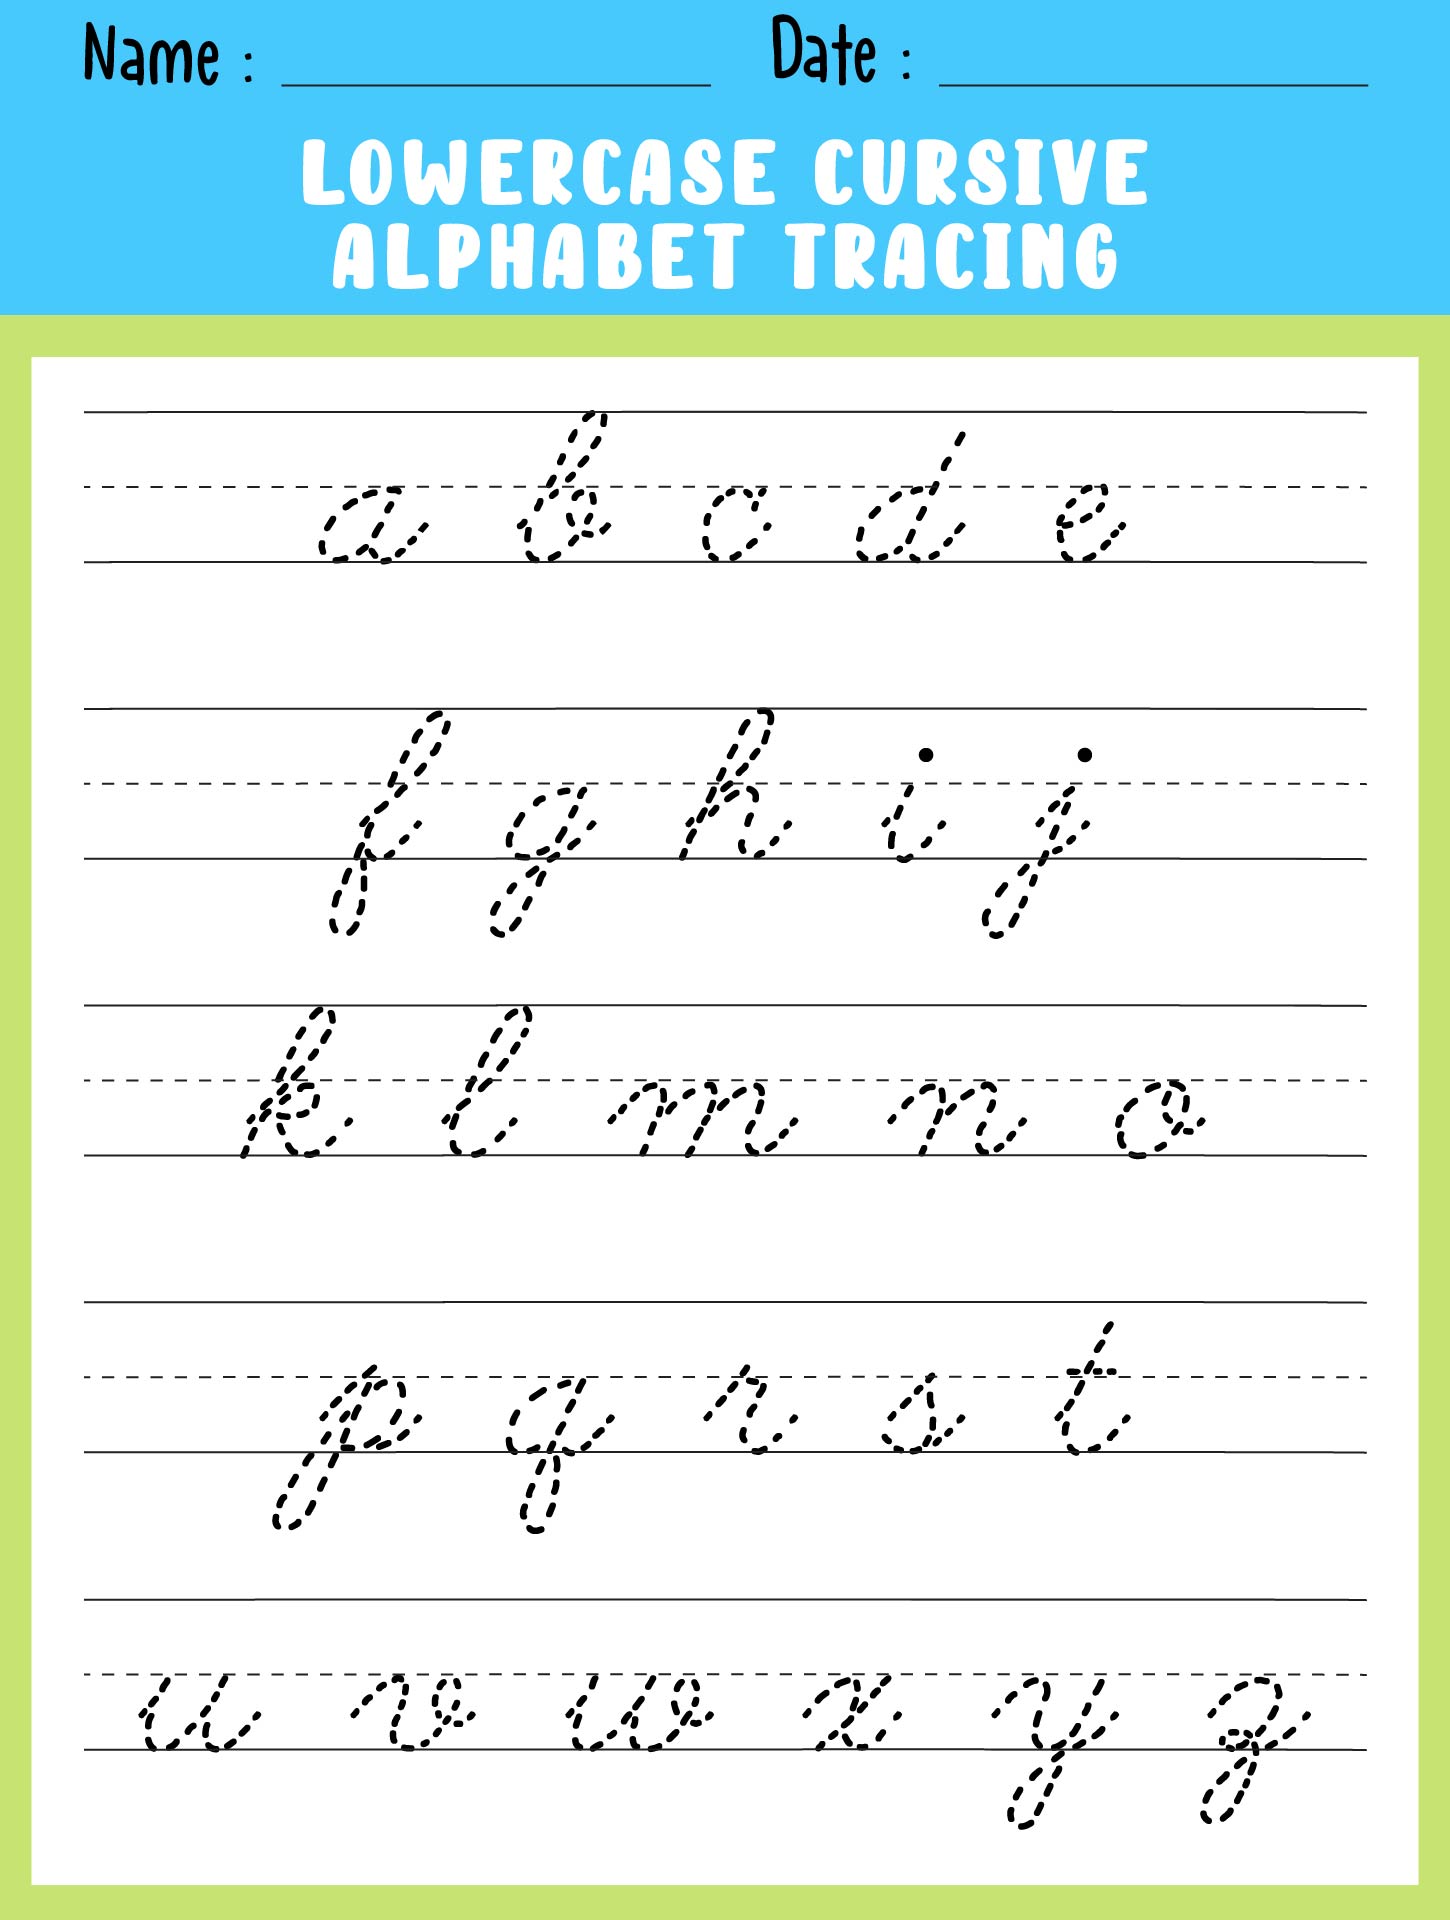 Lowercase Cursive Alphabet Tracing Worksheets For 1st-4th Grade